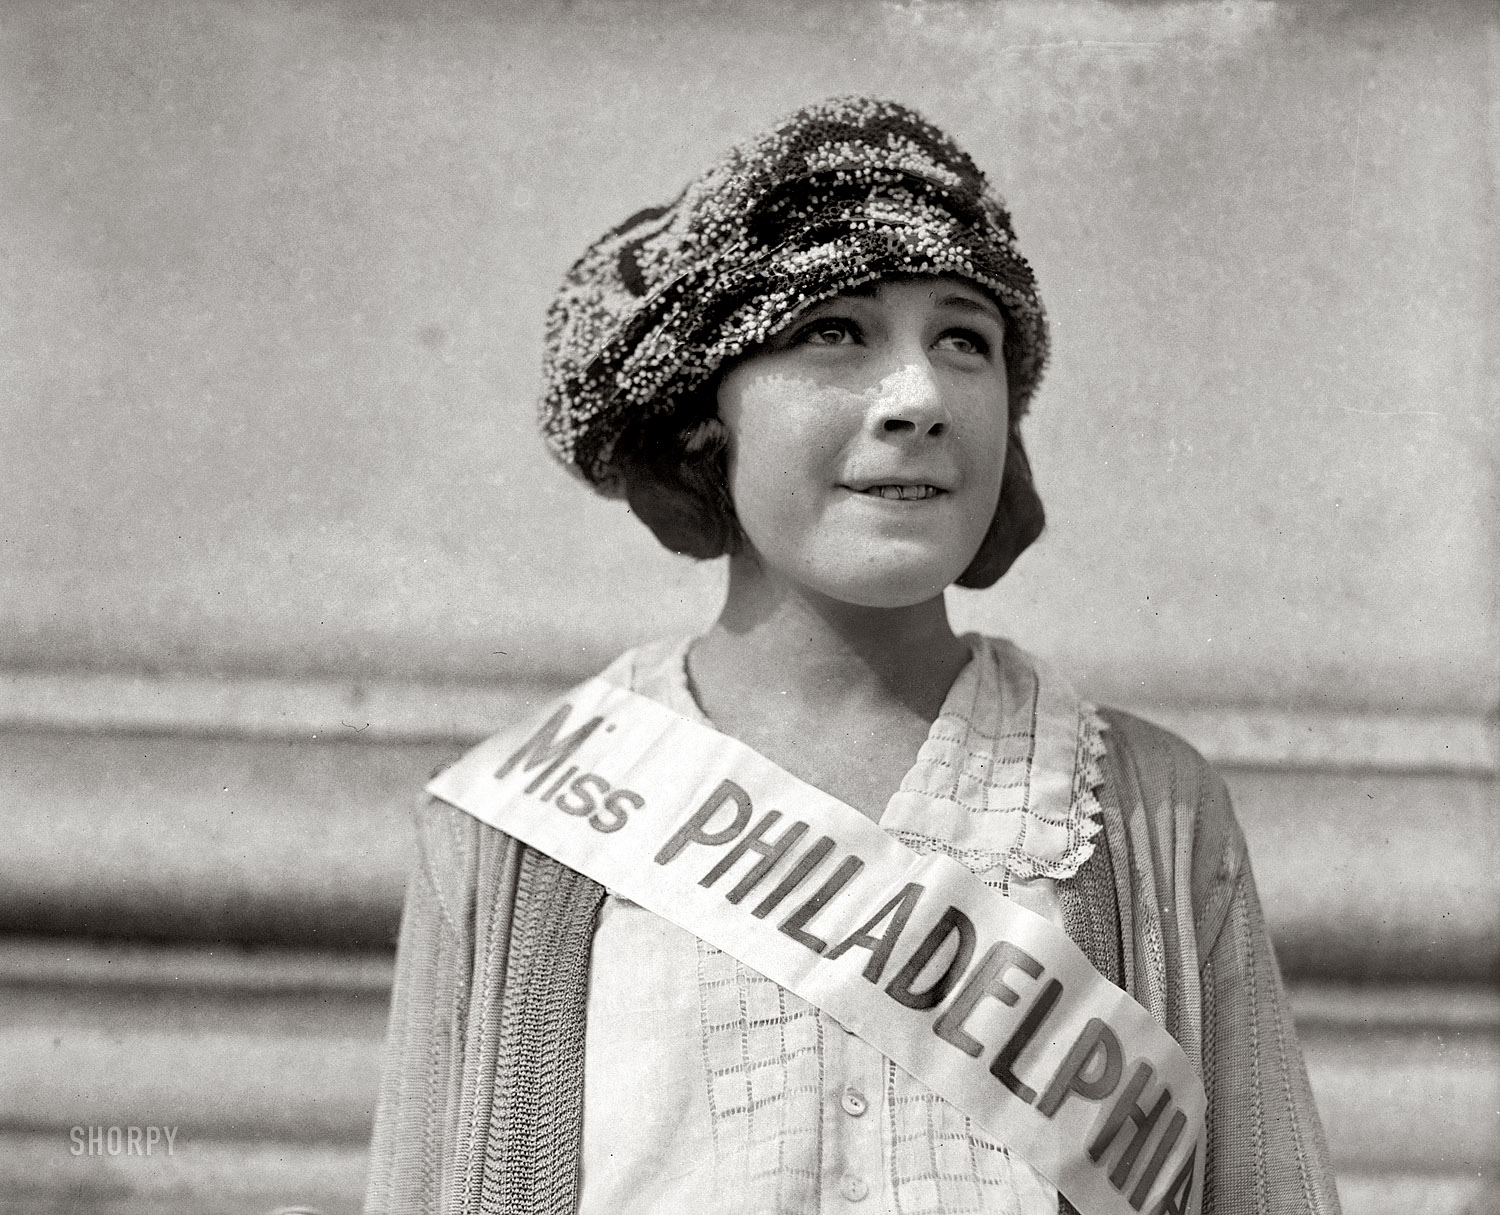 &nbsp; &nbsp; &nbsp; &nbsp; UPDATE: This is the lovely Miss Nellie Orr!
Washington, D.C., circa 1921. "Nellie [Illegible], Miss Philadelphia." Perhaps someone out there can put a last name to this winsome face. View full size.